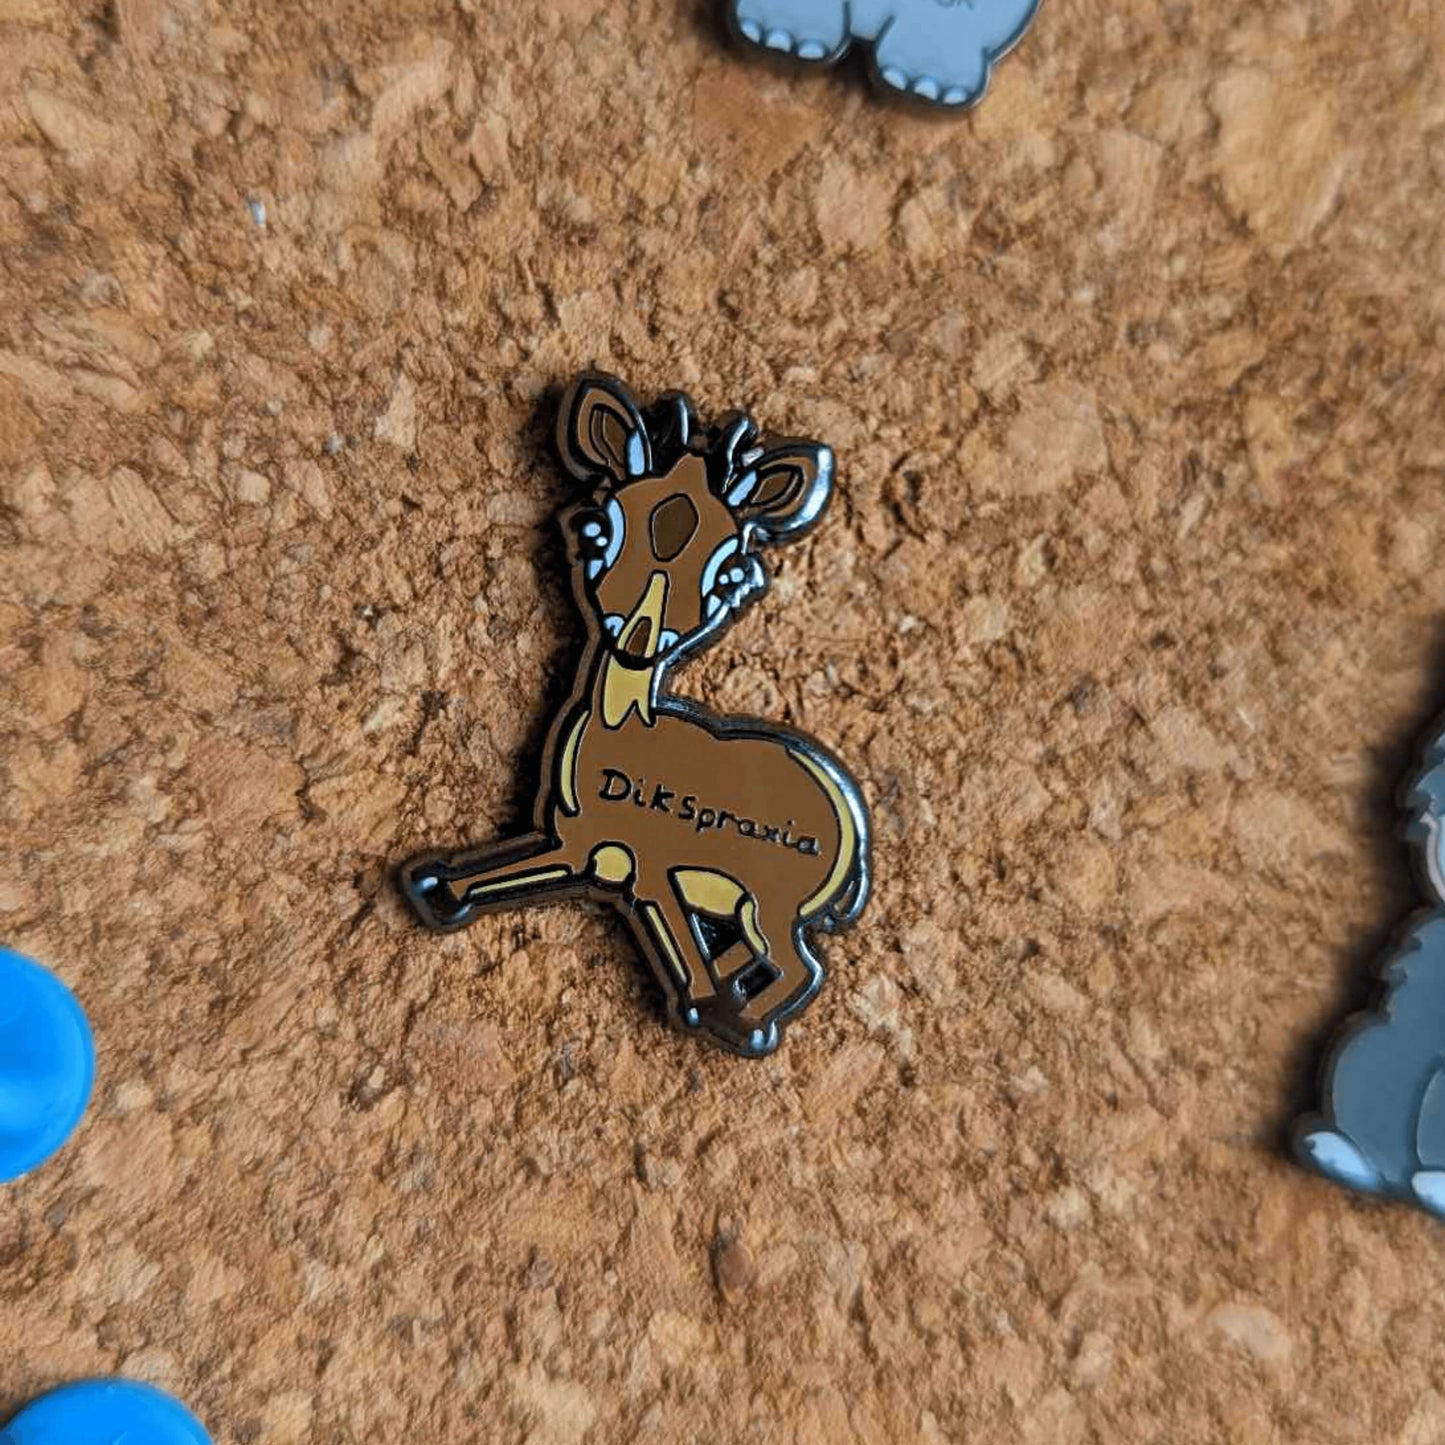 The Dikspraxia Enamel Pin - Dyspraxia pinned on a brown corkboard with other innabox pins. The brown dik dik antelope shaped enamel pin has its two front legs splayed chaotically with black text reading 'dikspraxia' across its middle. The design is raising awareness for dyspraxia and neurodivergence.